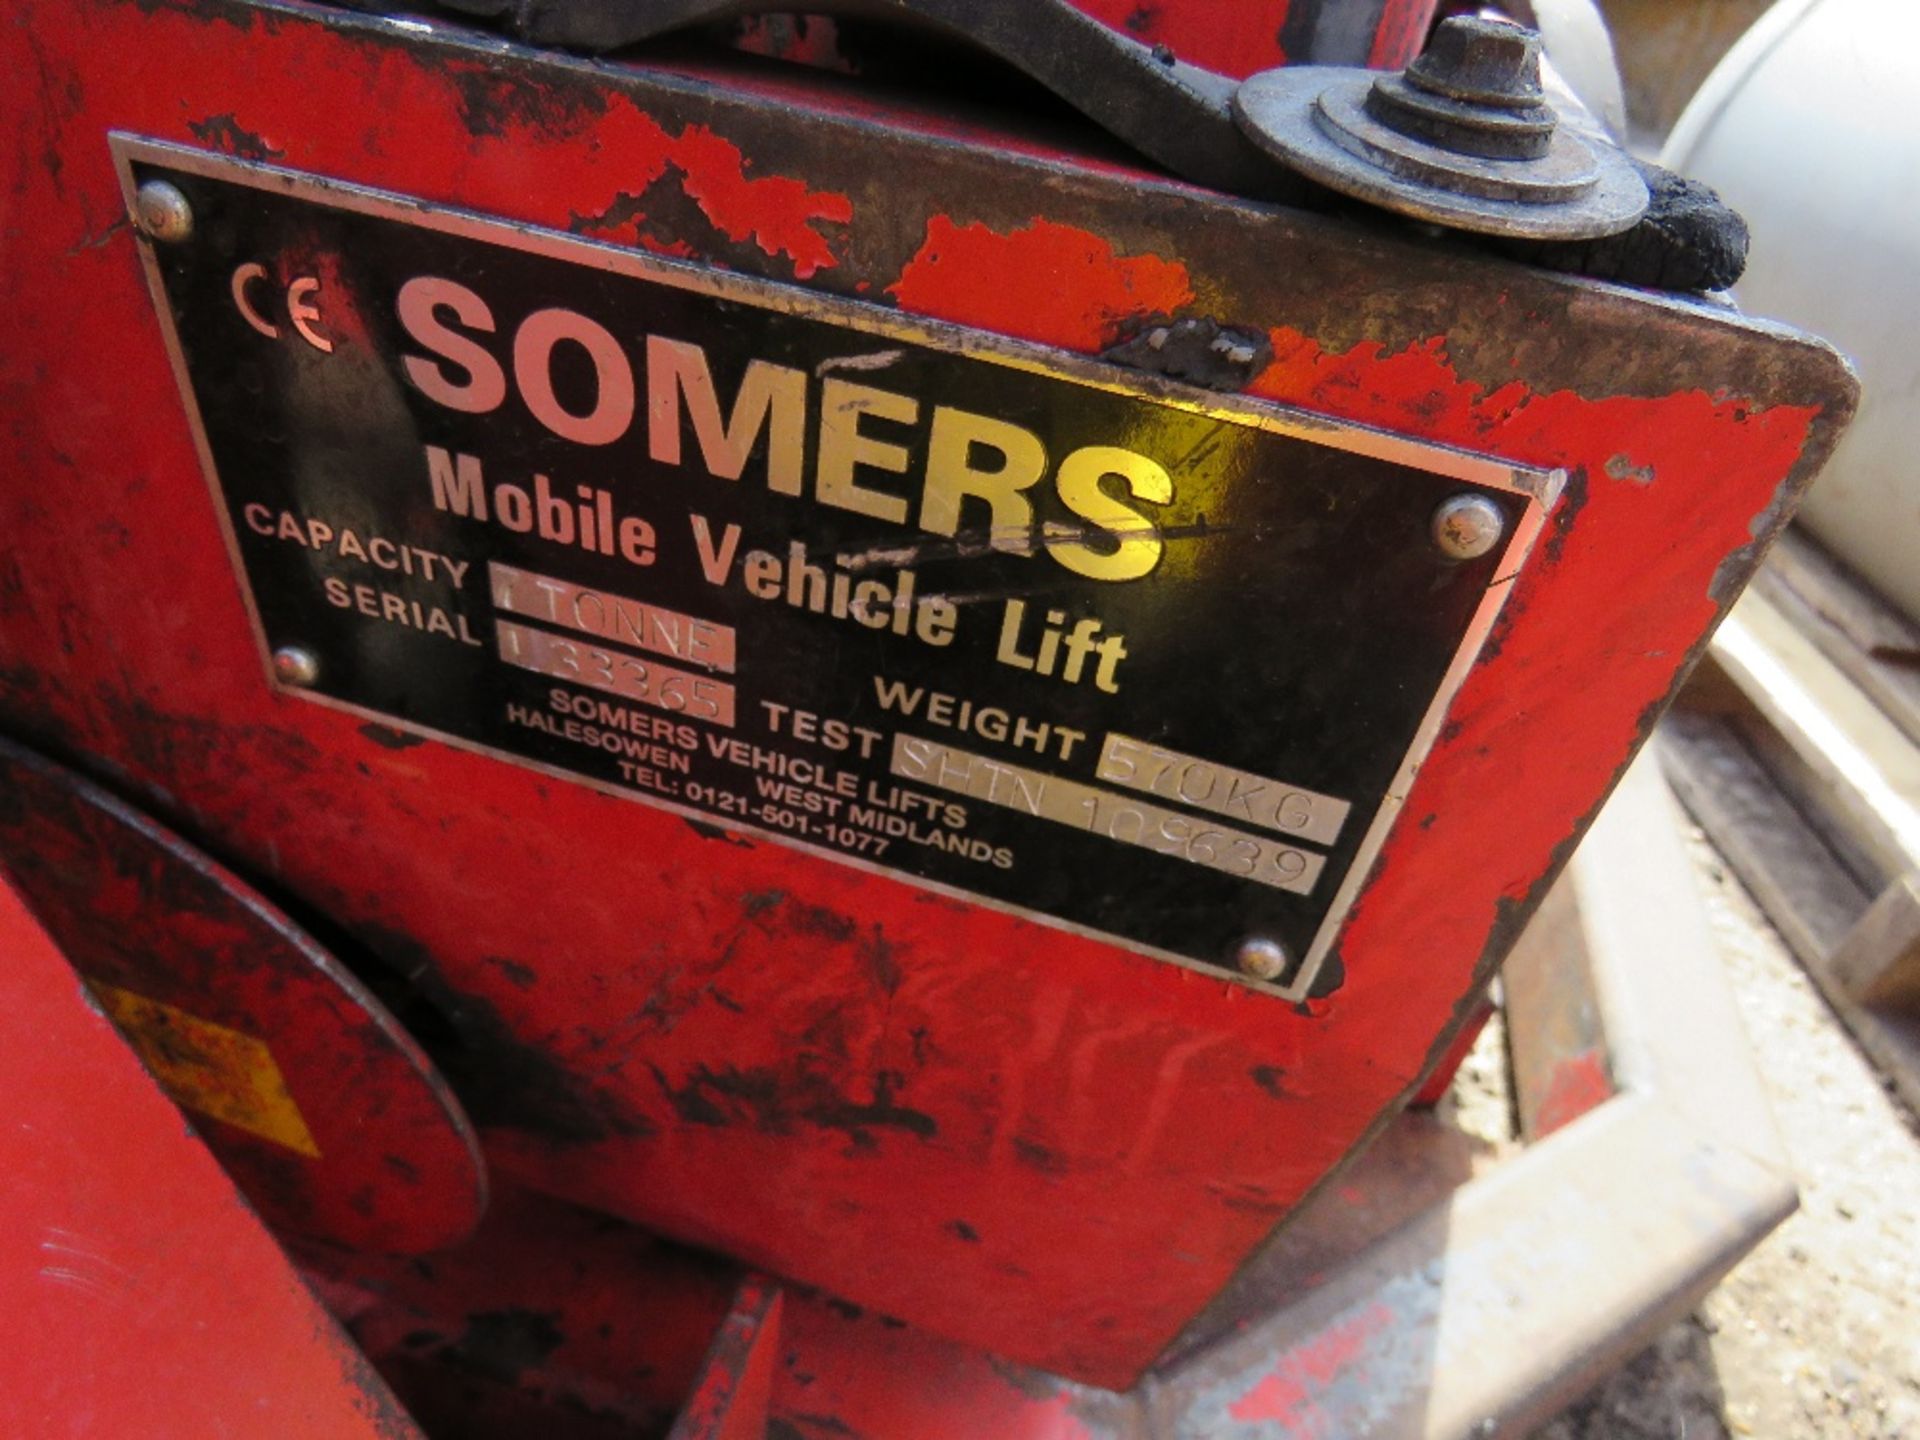 SET OF 4 X SOMERS PORTABLE COLUMN LIFT UNITS FOR COMMERCIAL VEHICLES, 7 TONNE RATED CAPACITY, EX COM - Image 5 of 6